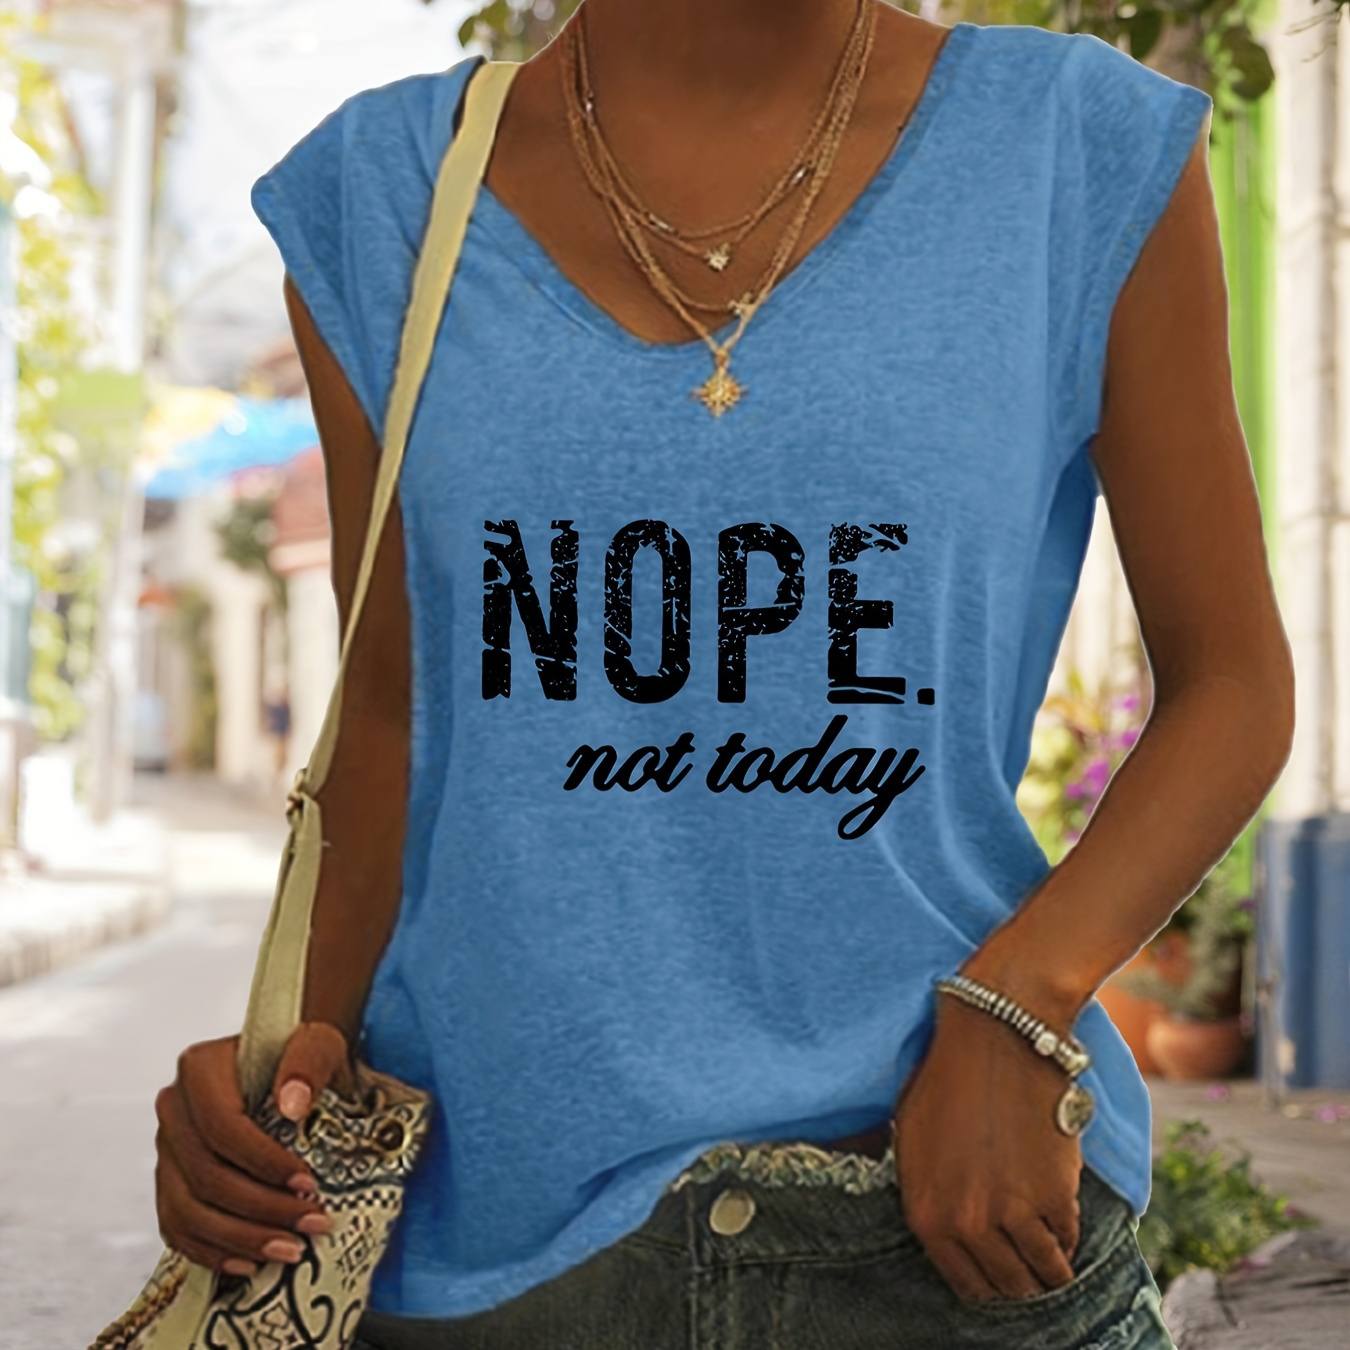 

Nope Print Tank Top, Sleeveless V Neck Casual Top For Spring & Summer, Women's Clothing